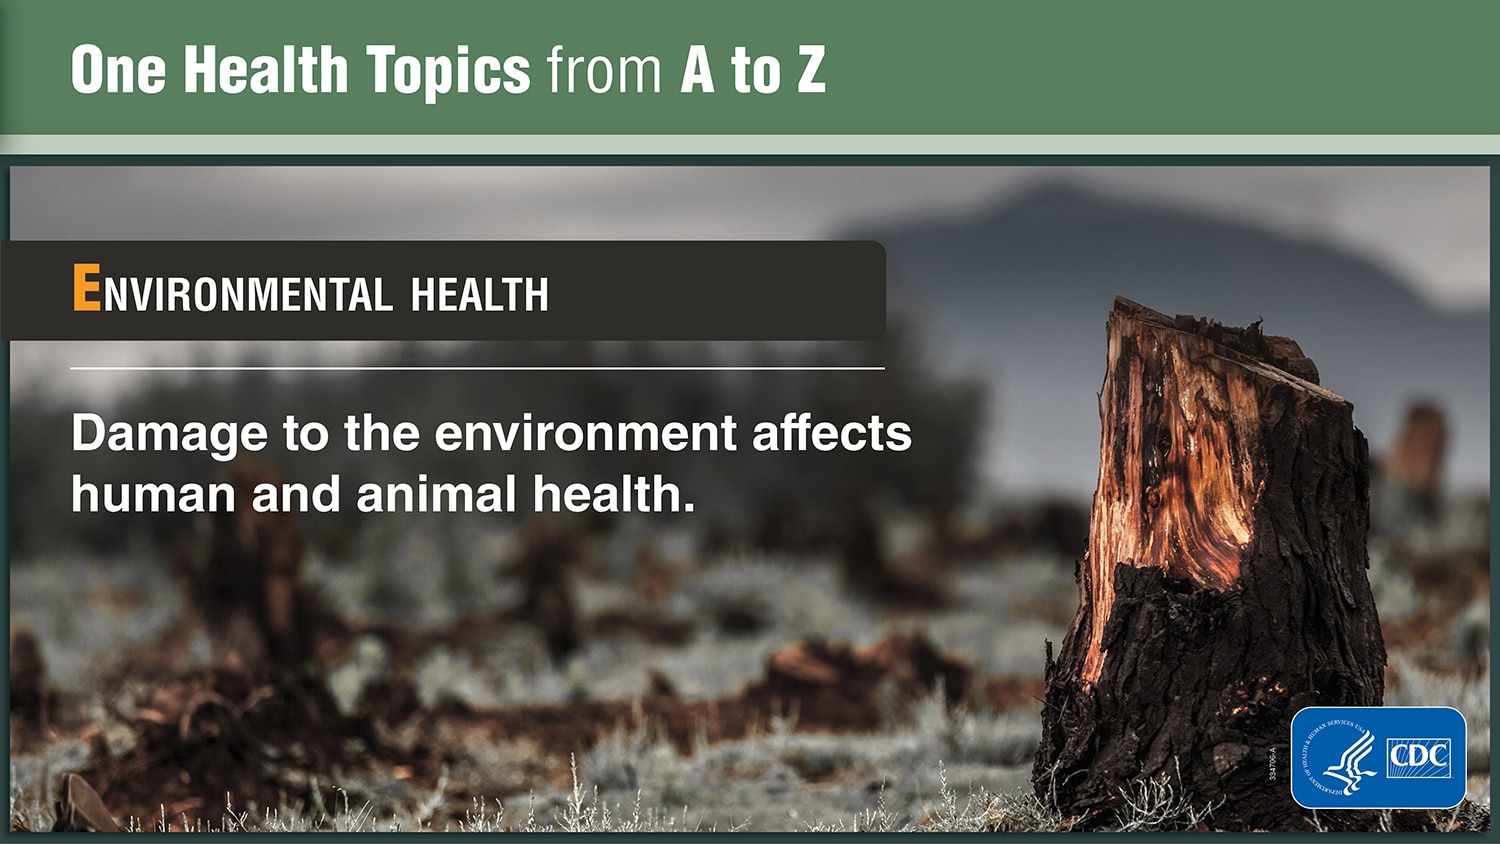 One Health Topics from A to Z explaining Environmental Health